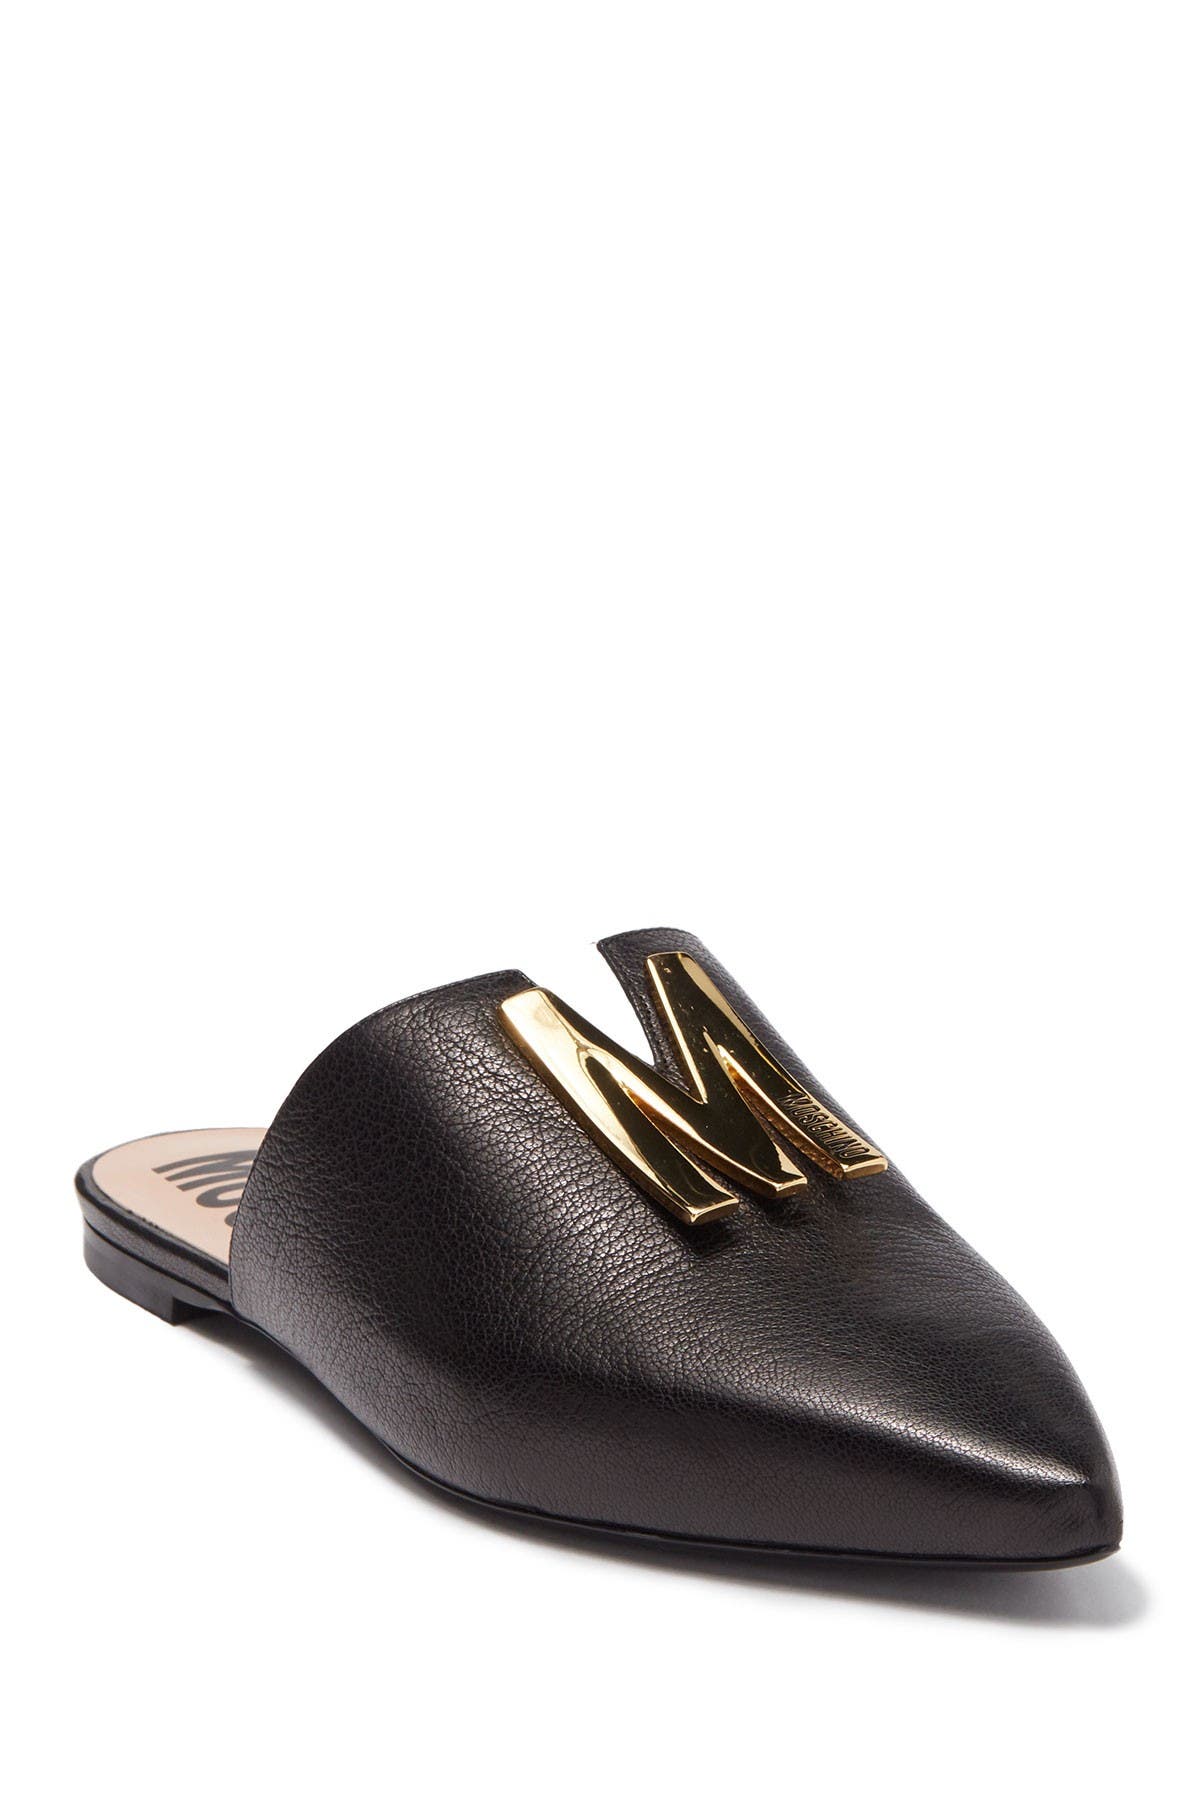 MOSCHINO | Pointed Toe Leather Mule 